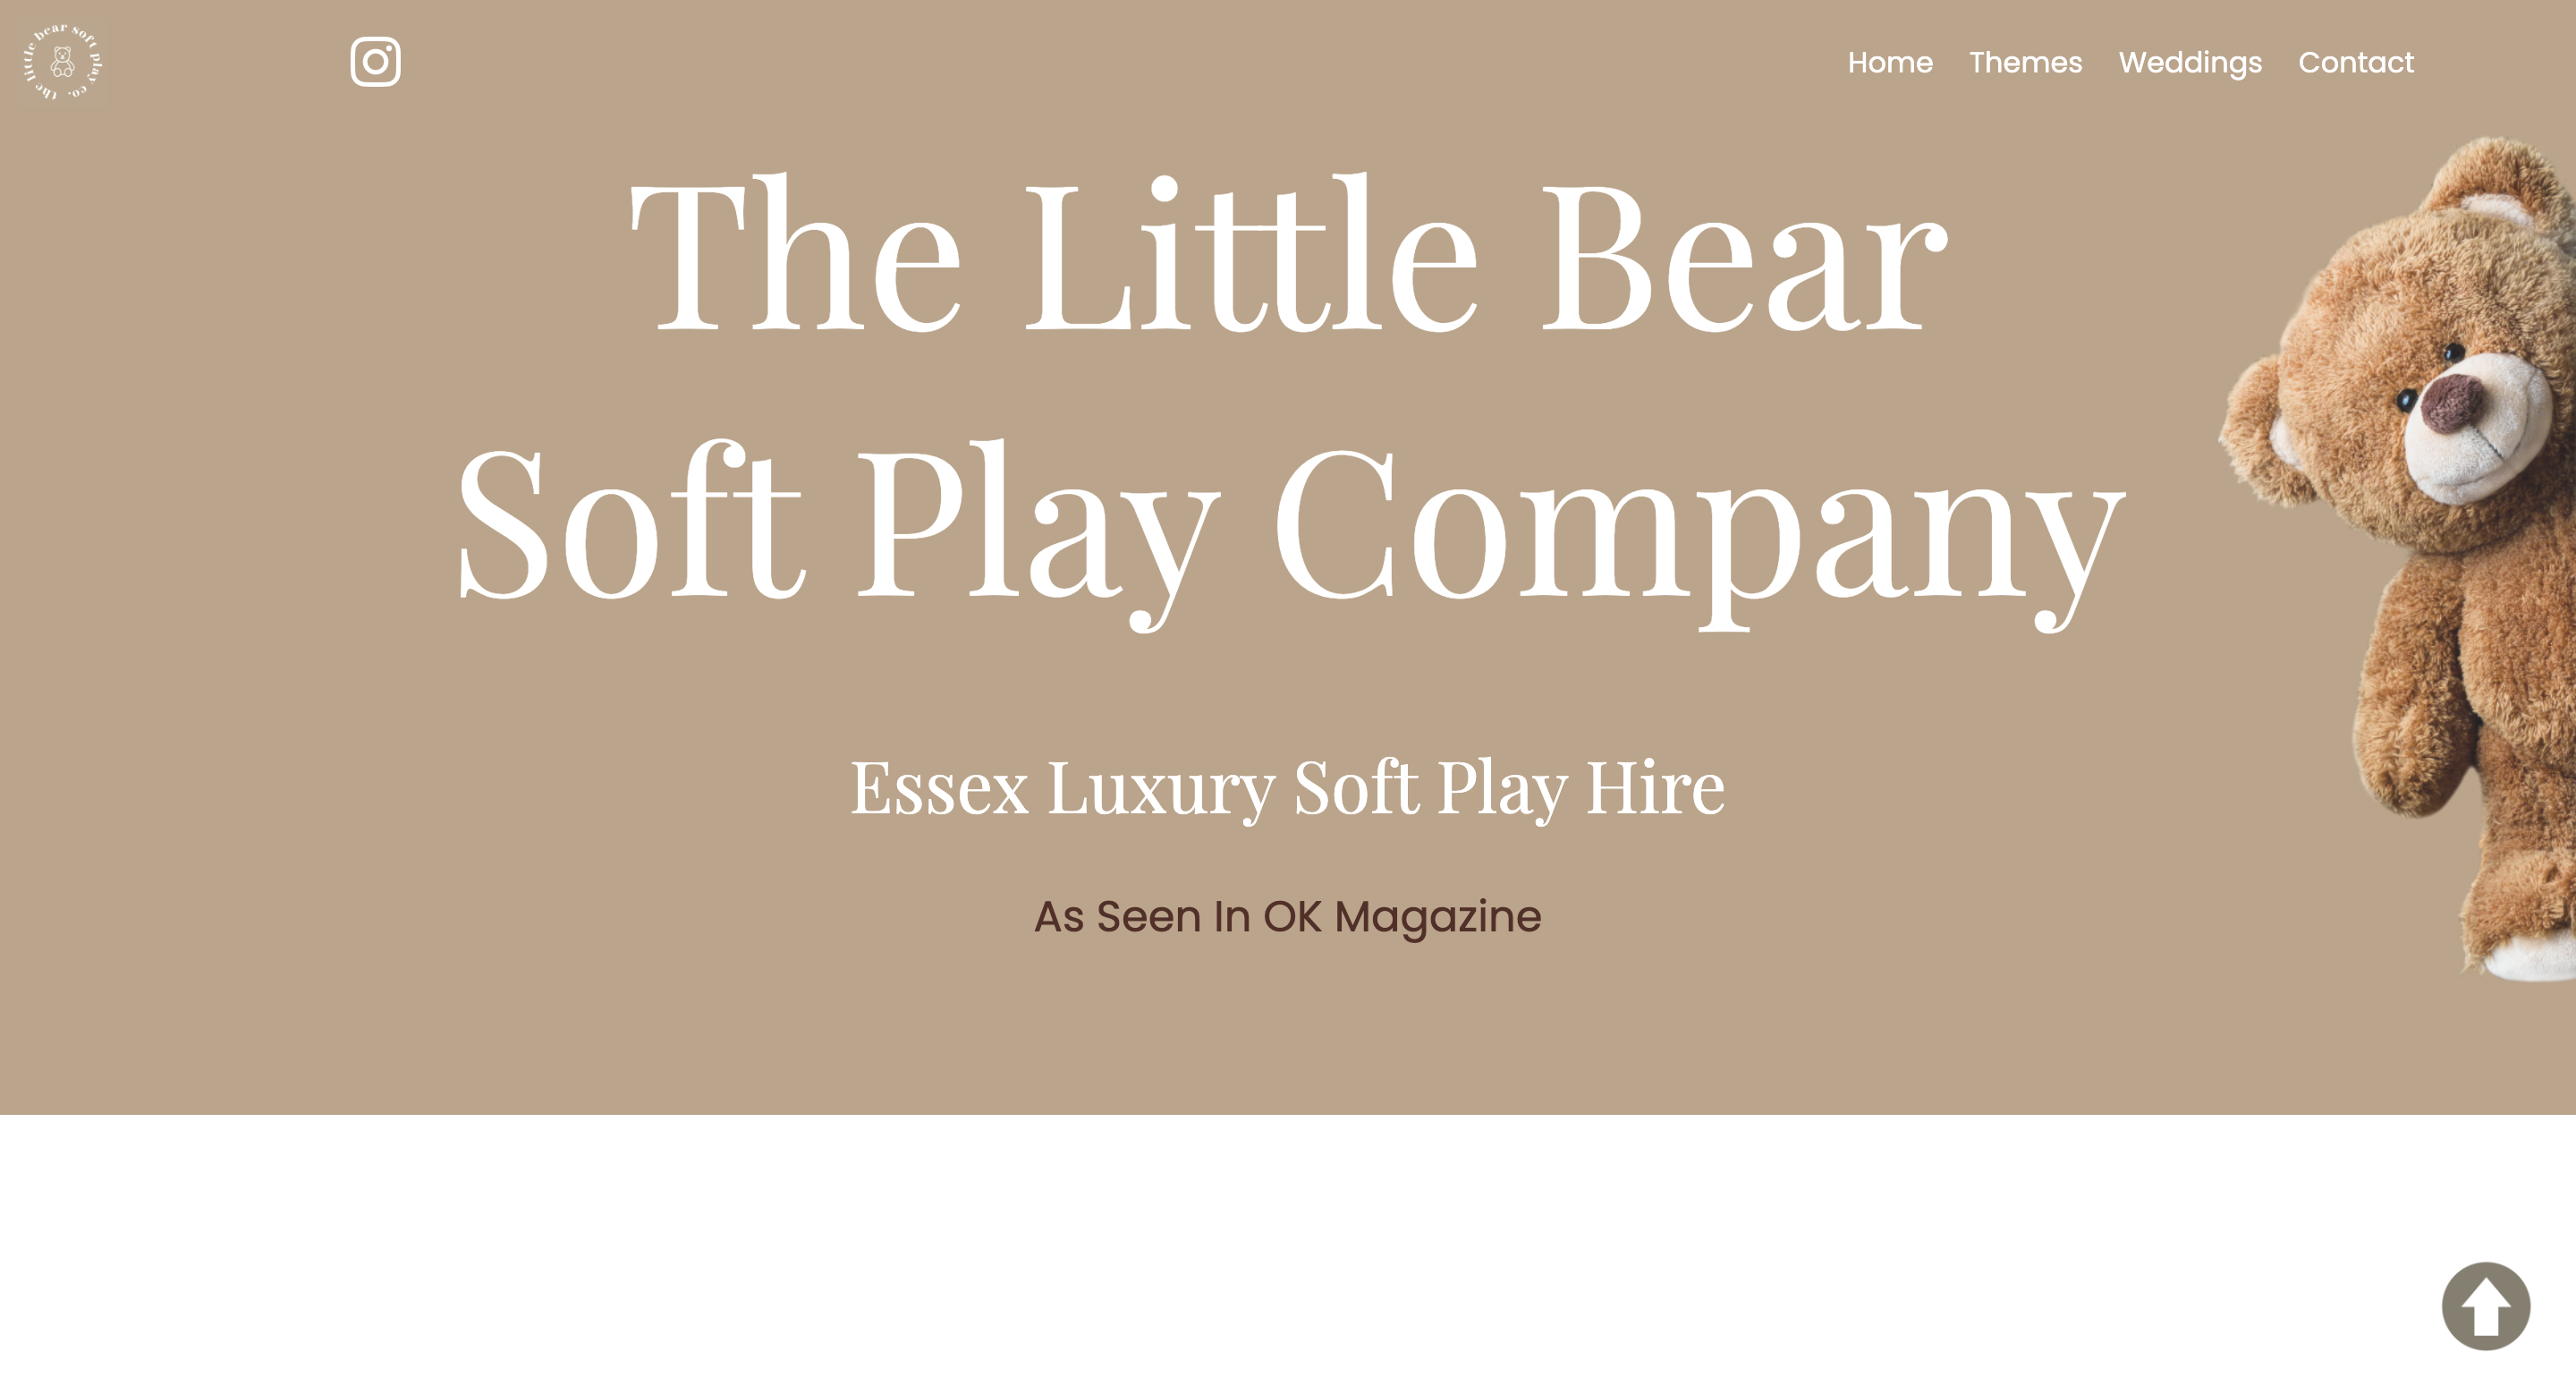 The Little Bear Soft Play Company Home Page